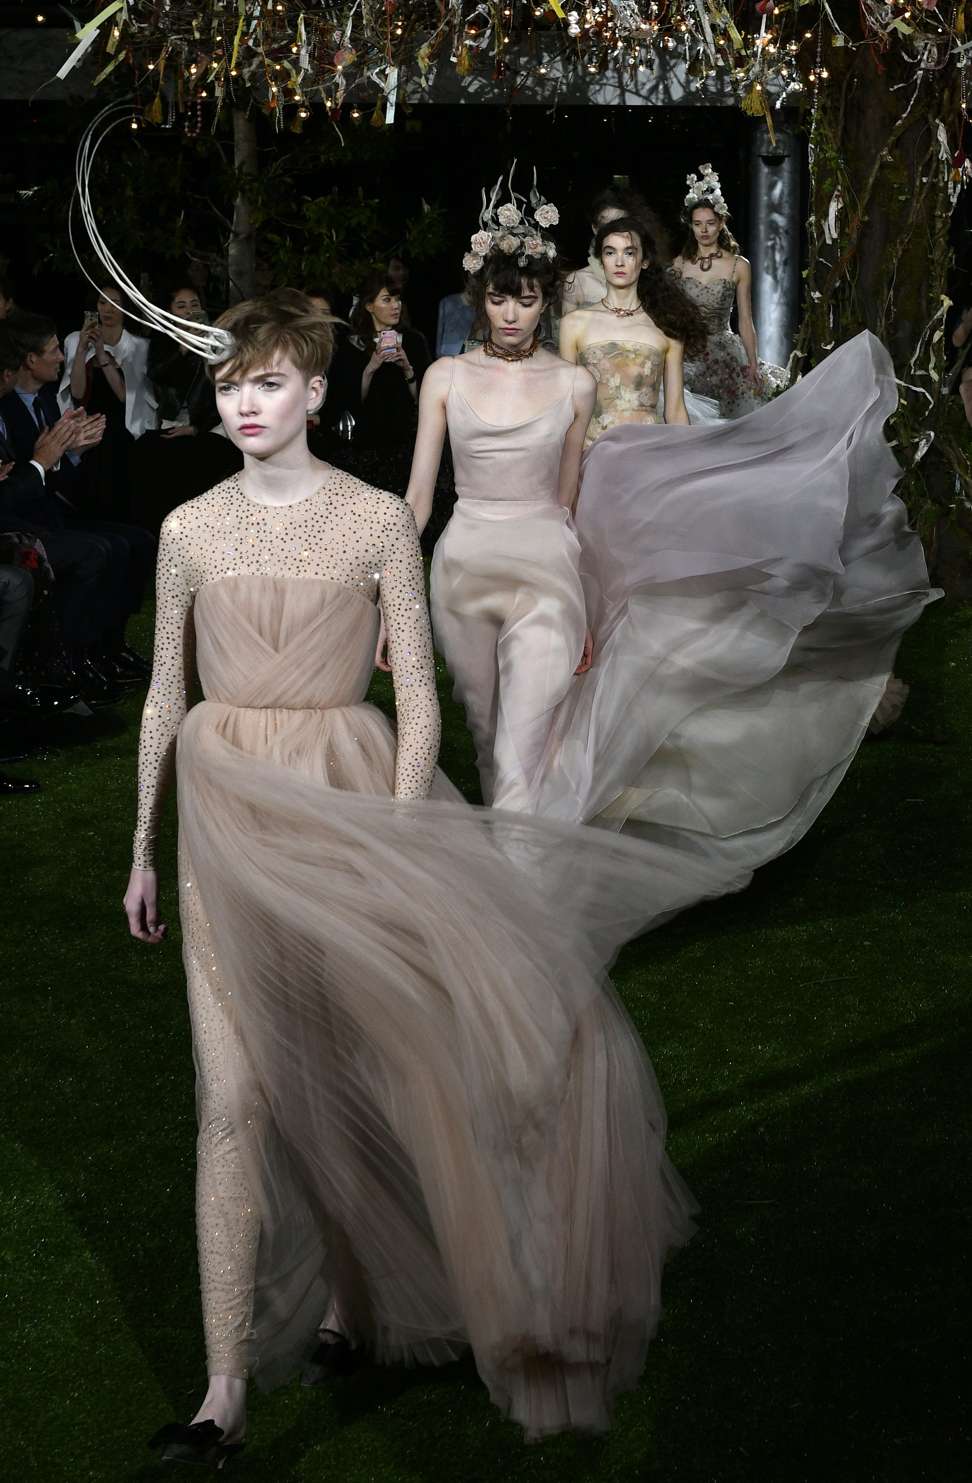 Backstage at Dior's Tokyo show, models turn to macaroons and